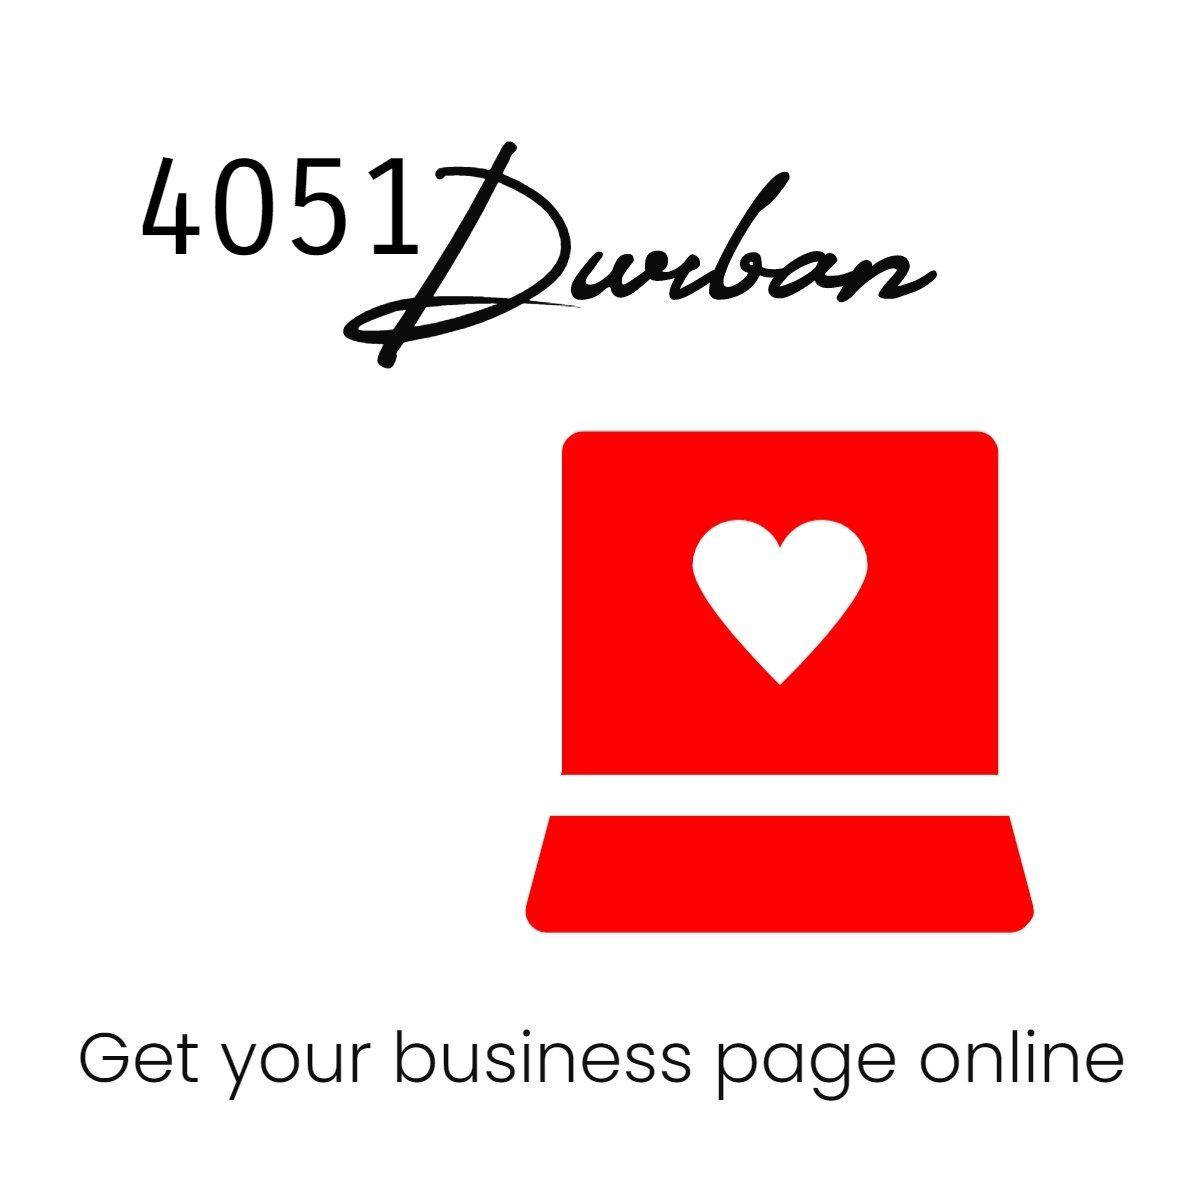 4051Durban Business Listing and classifieds for Durban North